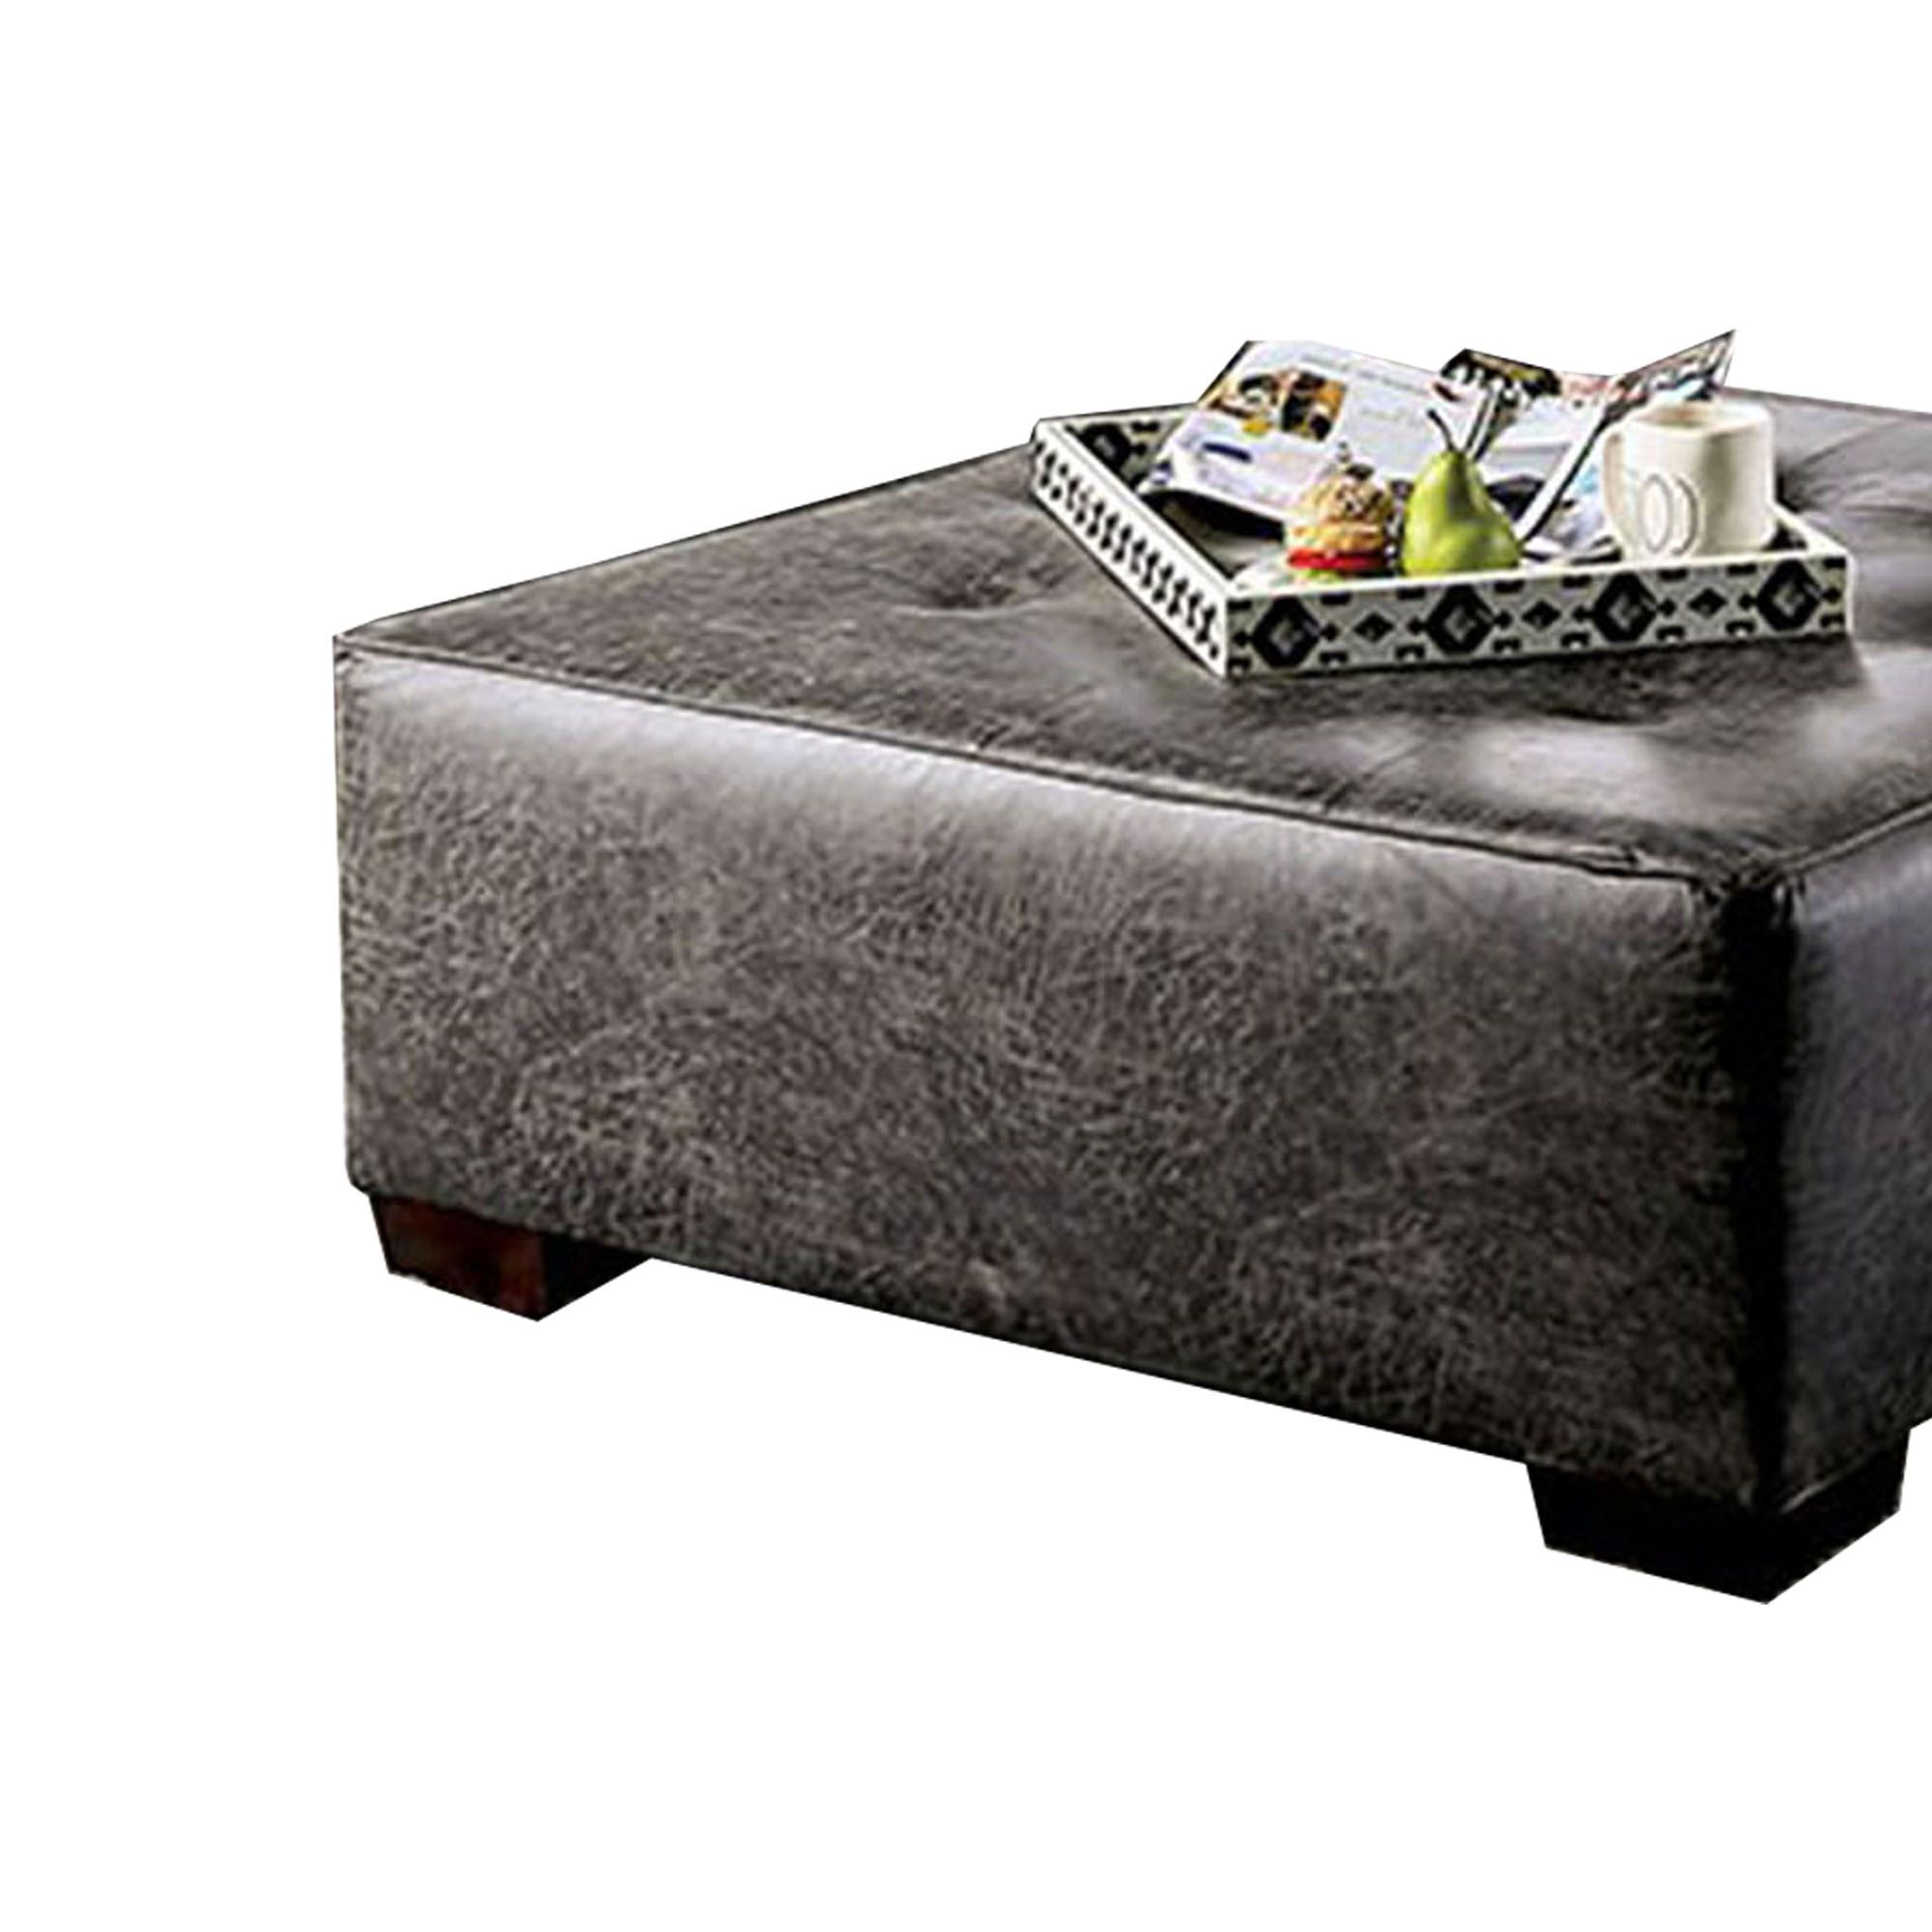 Fashionable Wooden Legs Ottomans With Button Tufted Leatherette Wooden Ottoman With Block Legs, Gray (View 9 of 10)